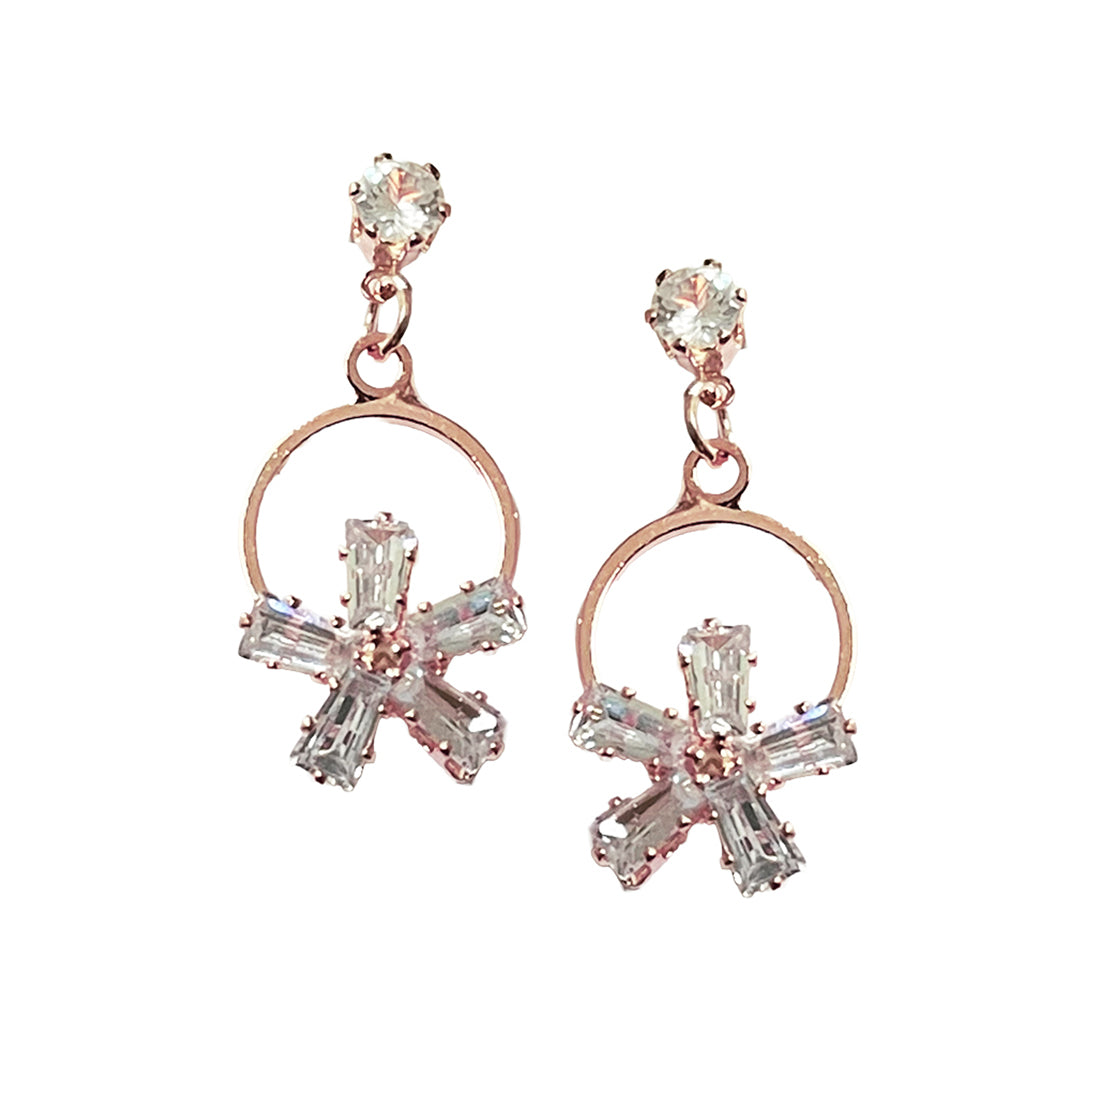 CONTEMPORARY RHINESTONE STUDDED ROSE-GOLD TONED FLOWER DROP EARRINGS